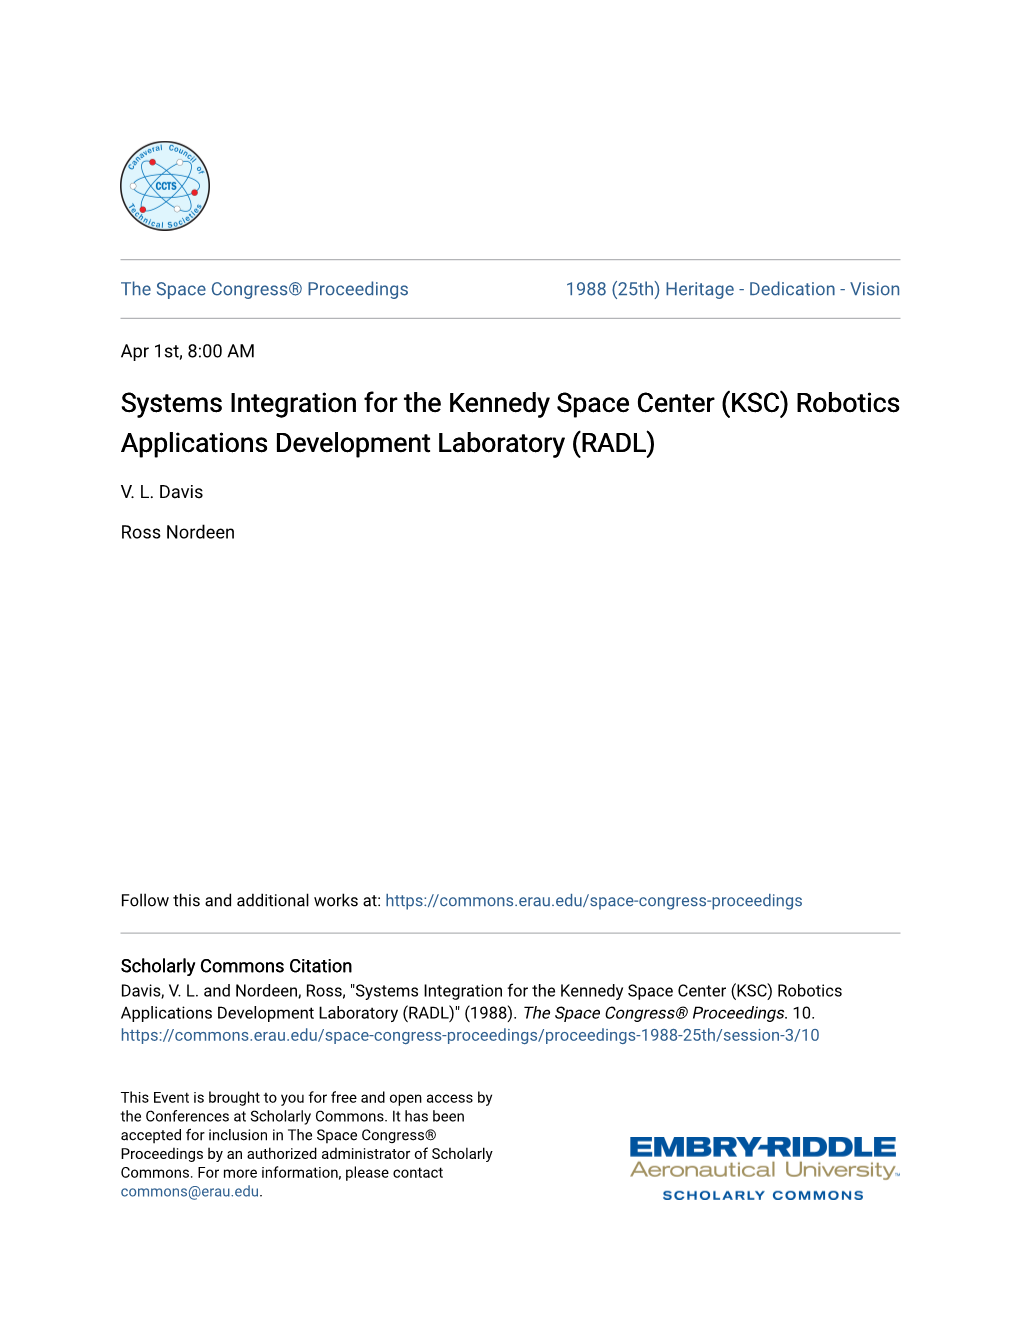 Systems Integration for the Kennedy Space Center (KSC) Robotics Applications Development Laboratory (RADL)